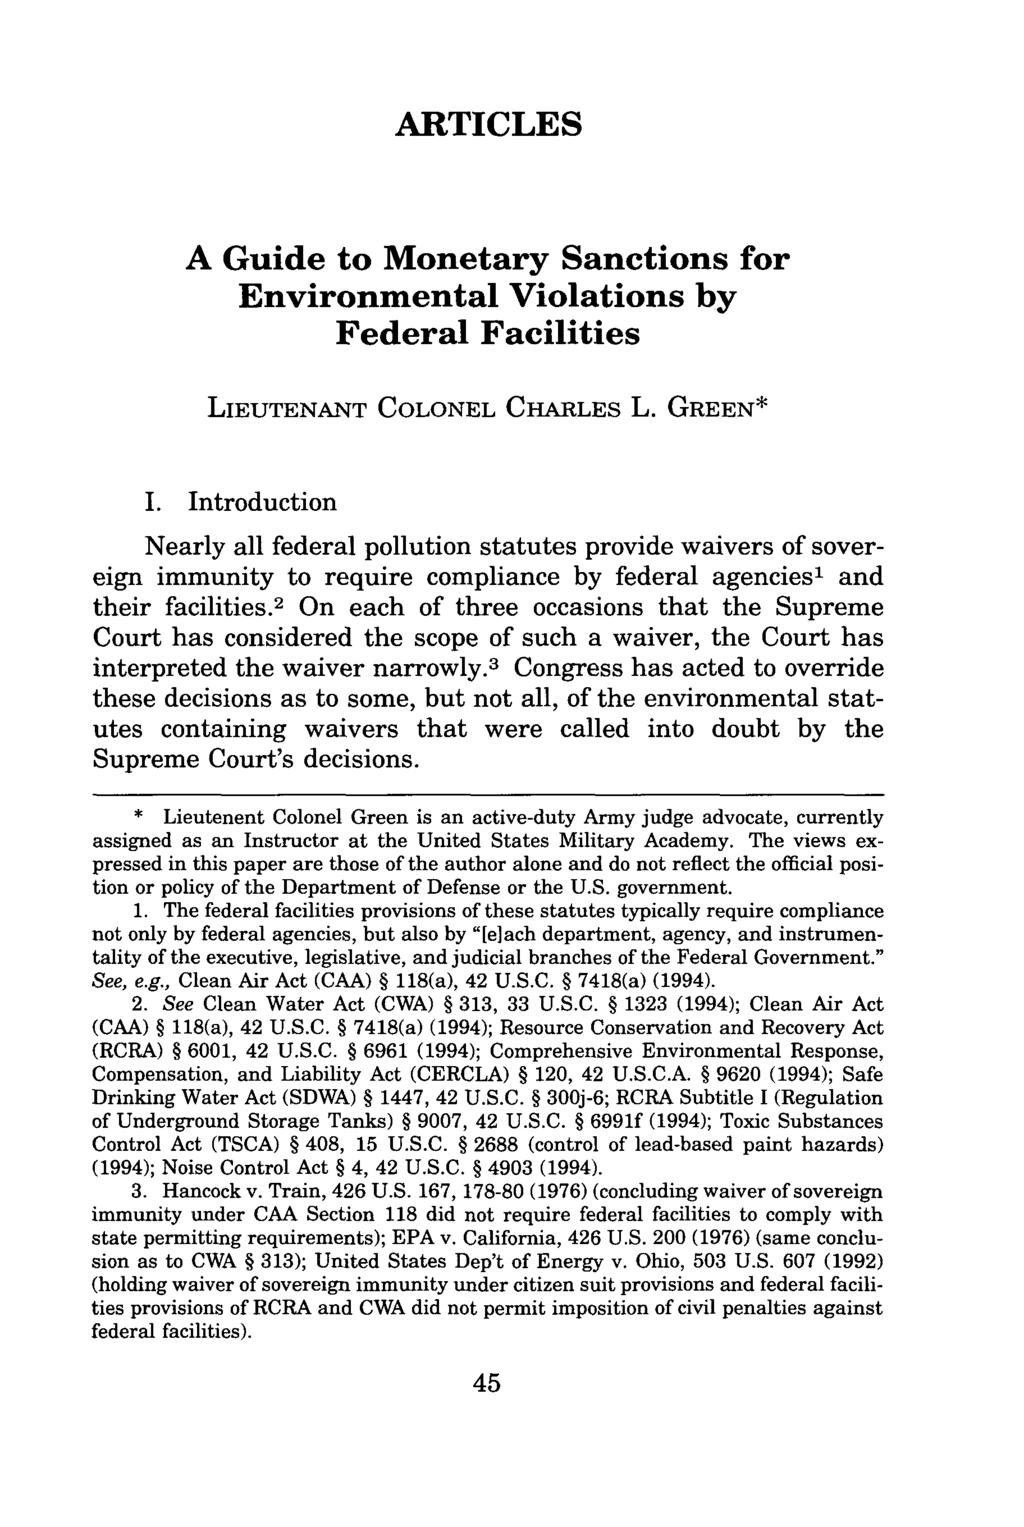 ARTICLES A Guide to Monetary Sanctions for Environmental Violations by Federal Facilities LIEUTENANT COLONEL CHARLES L. GREEN* I.